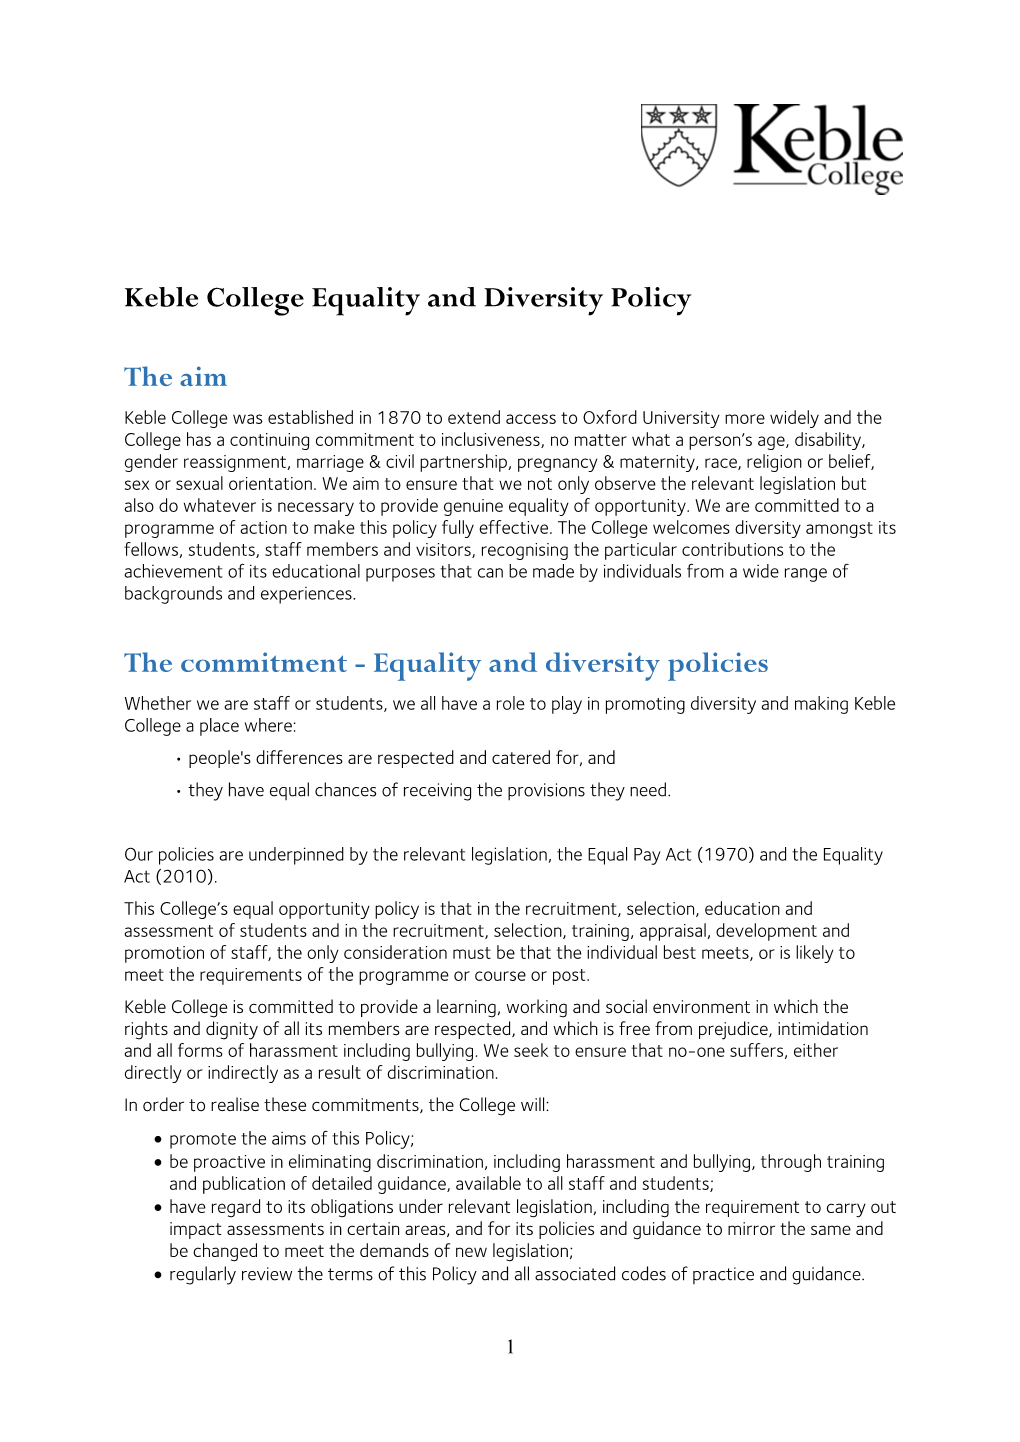 Keble College Equality and Diversity Policy the Aim the Commitment